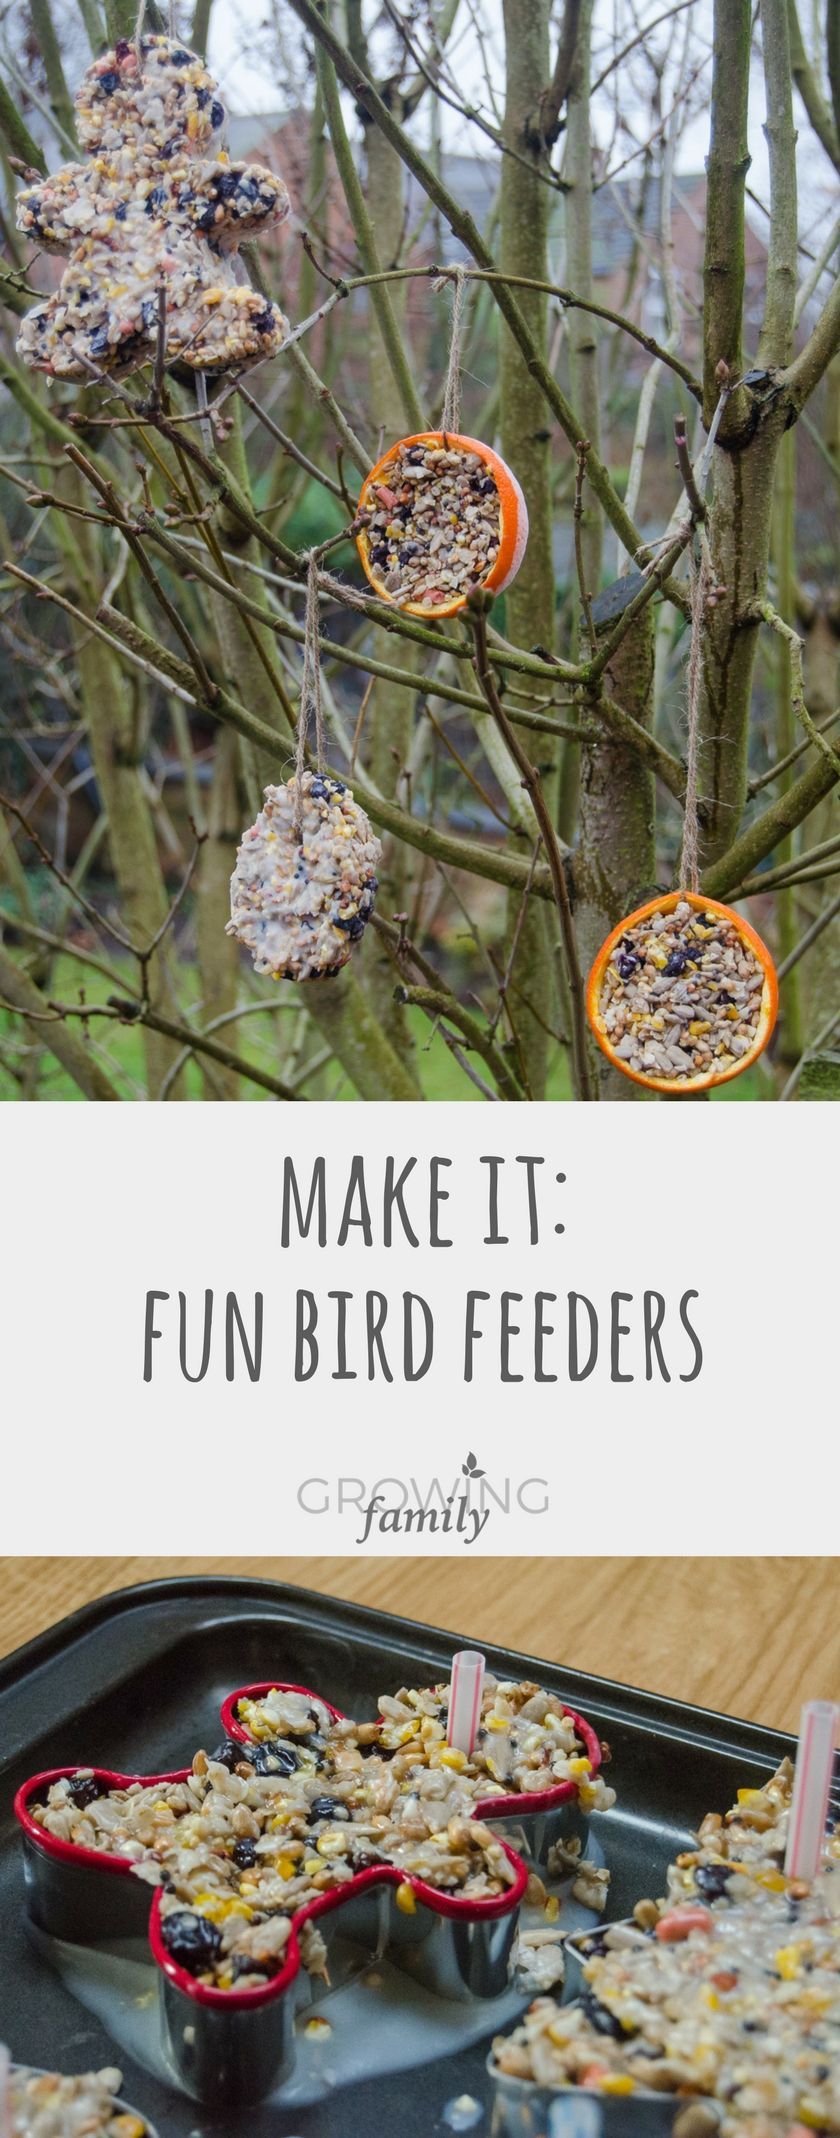 How to make your own homemade bird feeders – a simple and fun nature activity for children which will encourage wild birds to